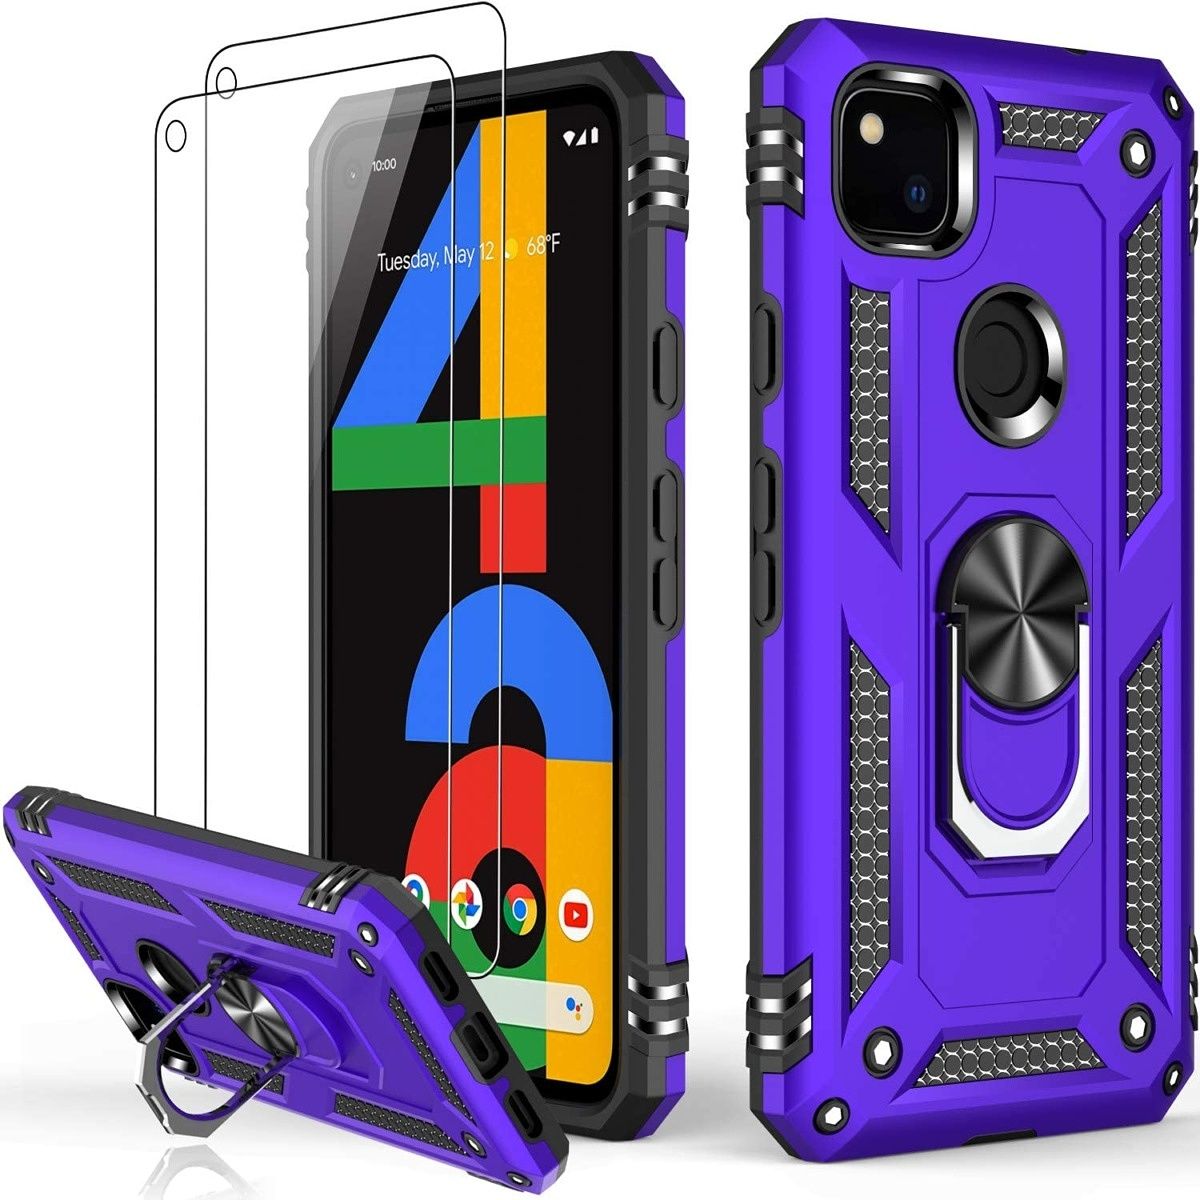 This is a rugged case with dual-layer protection so it's going to add some bulk to your phone. It comes with two free screen protectors and has a kickstand built-in.